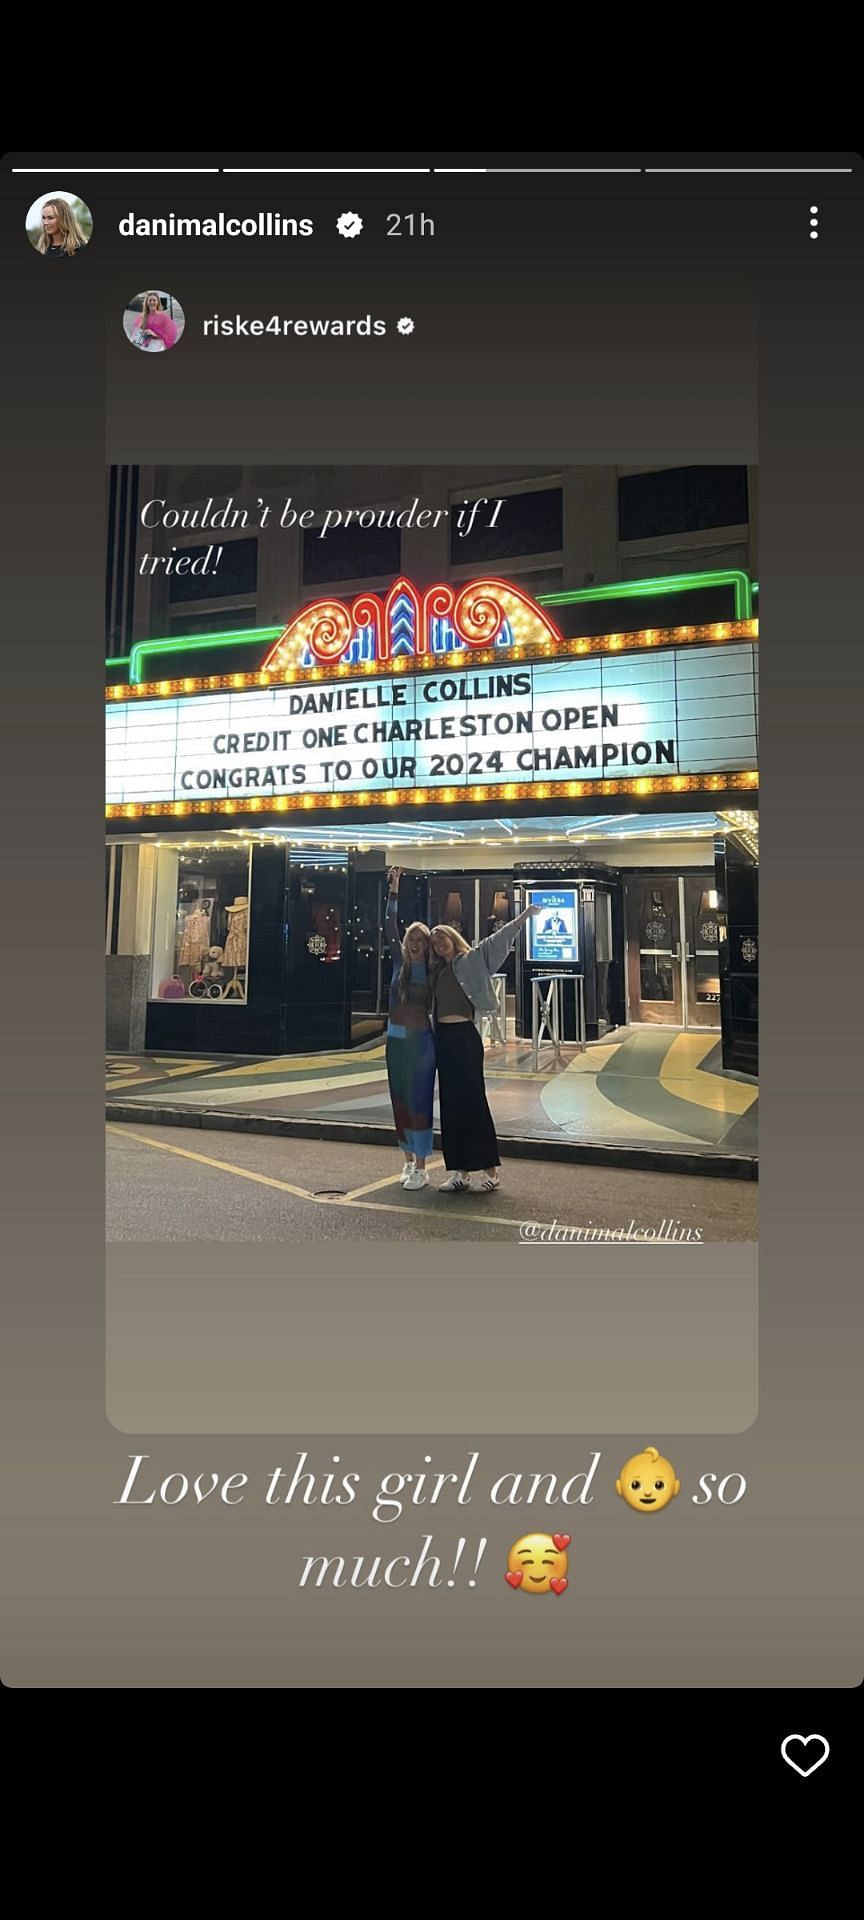 Danielle Collins&#039; Instagram post featuring herself and Alison Riske-Amritraj posing in front of a board with a congratulatory message for the Charleston Open champion